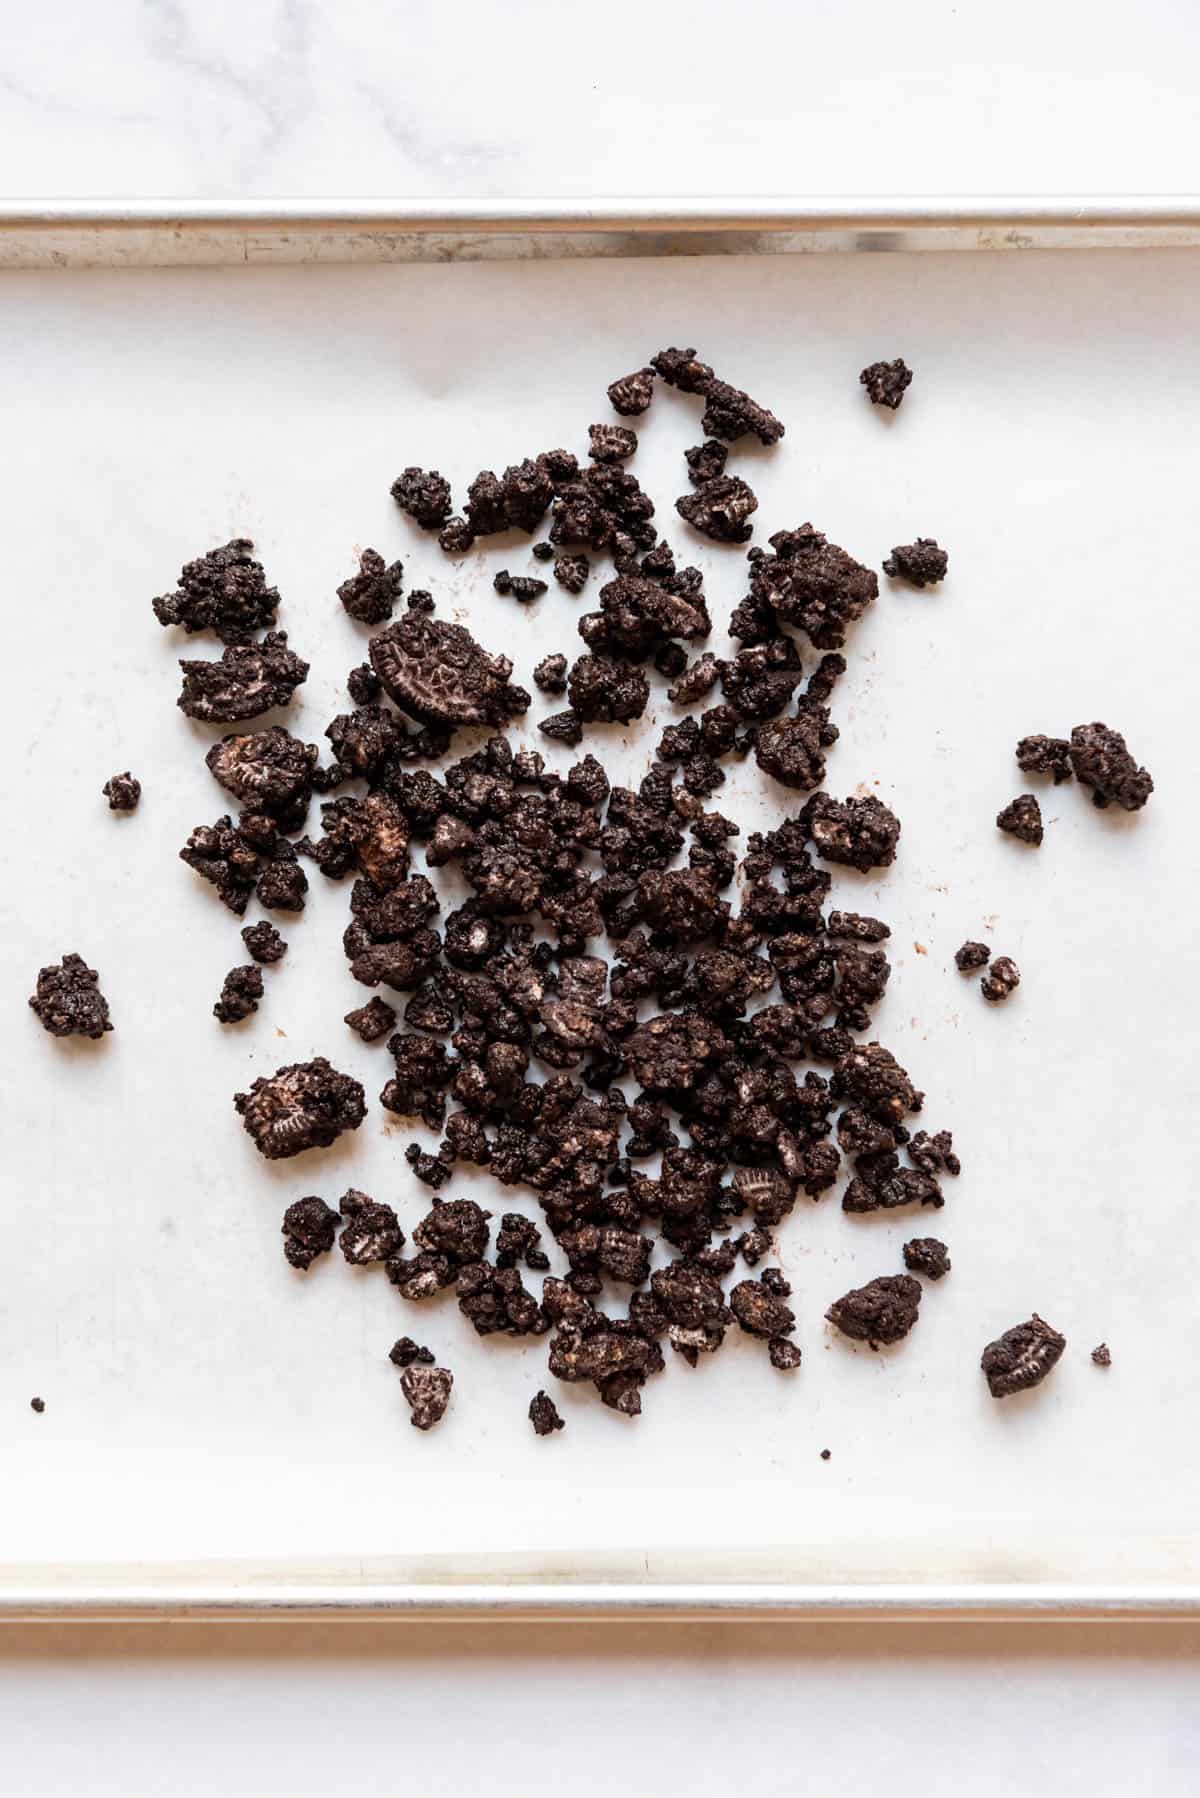 Crushed Oreo pieces tossed with butter and cocoa powder on a baking sheet lined with parchment paper.